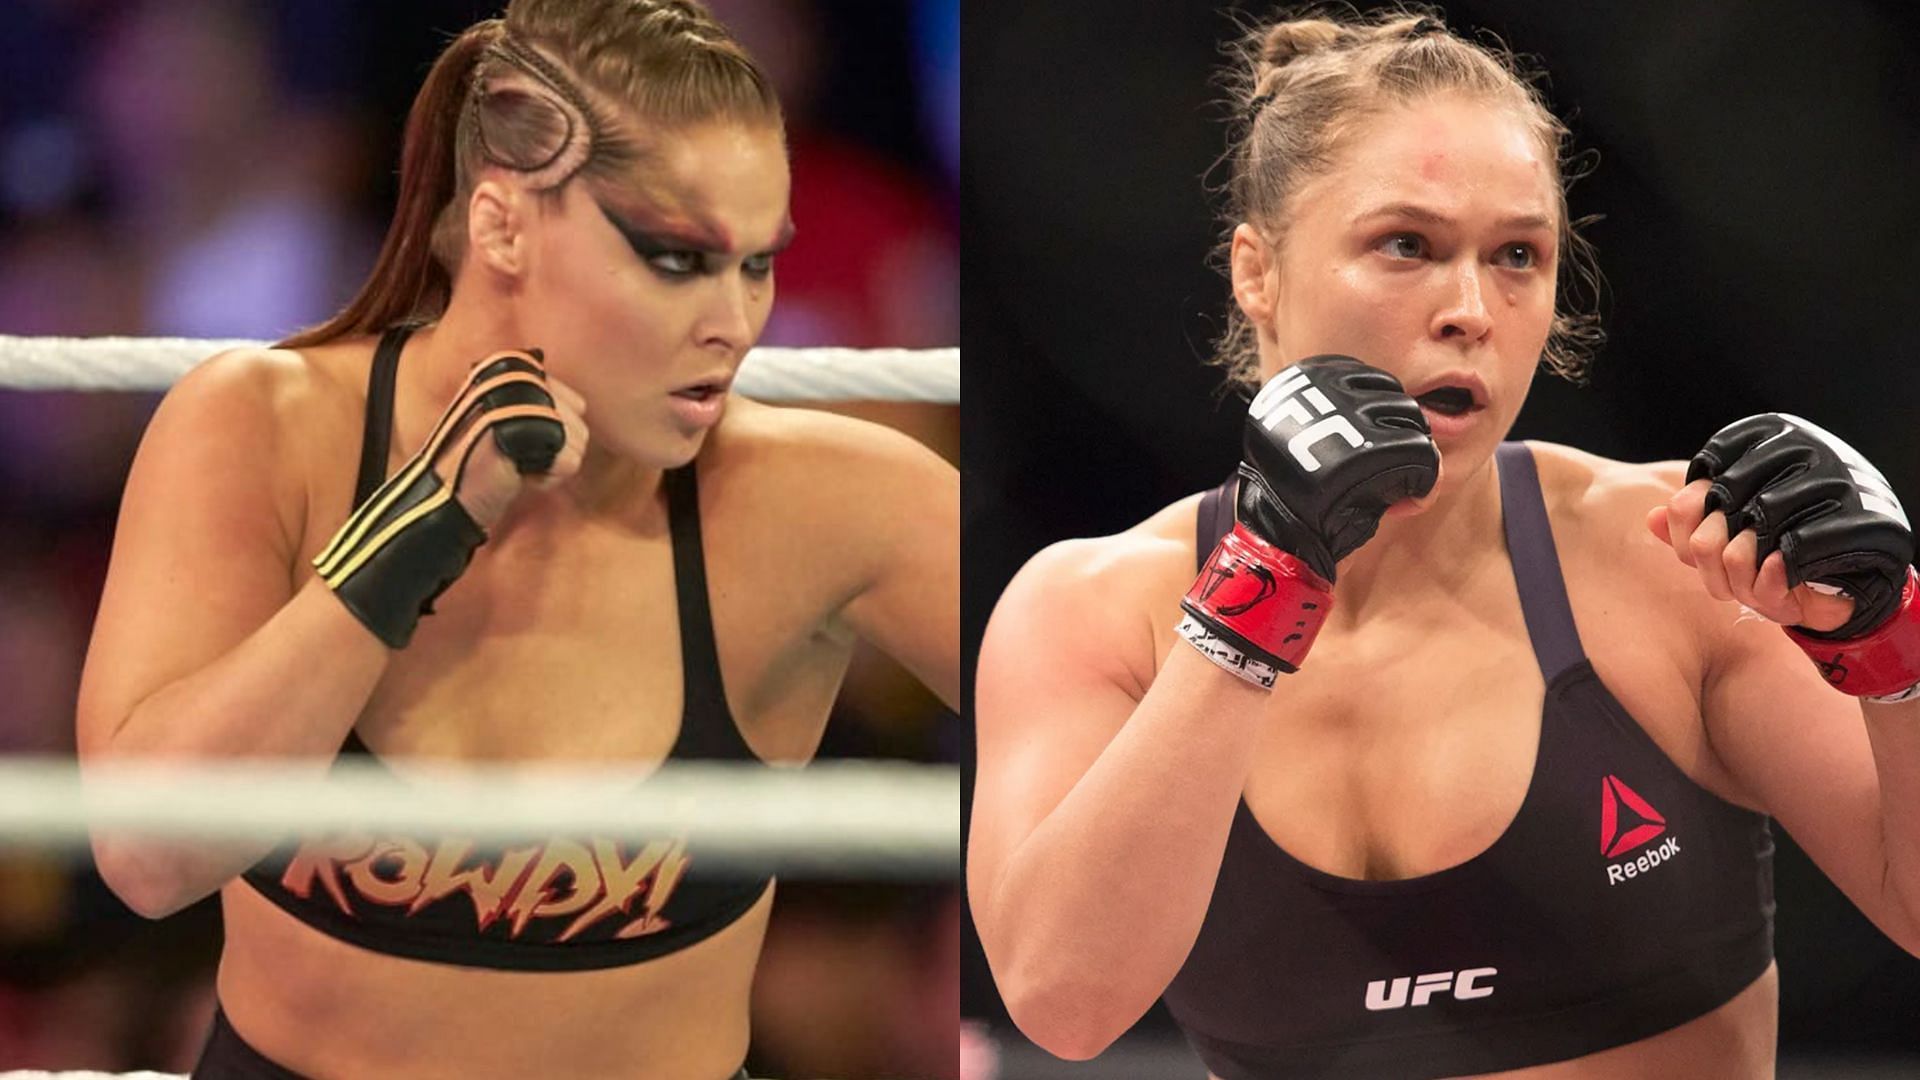 Ronda Rousey squaring up her opponent in UFC &amp; WWE